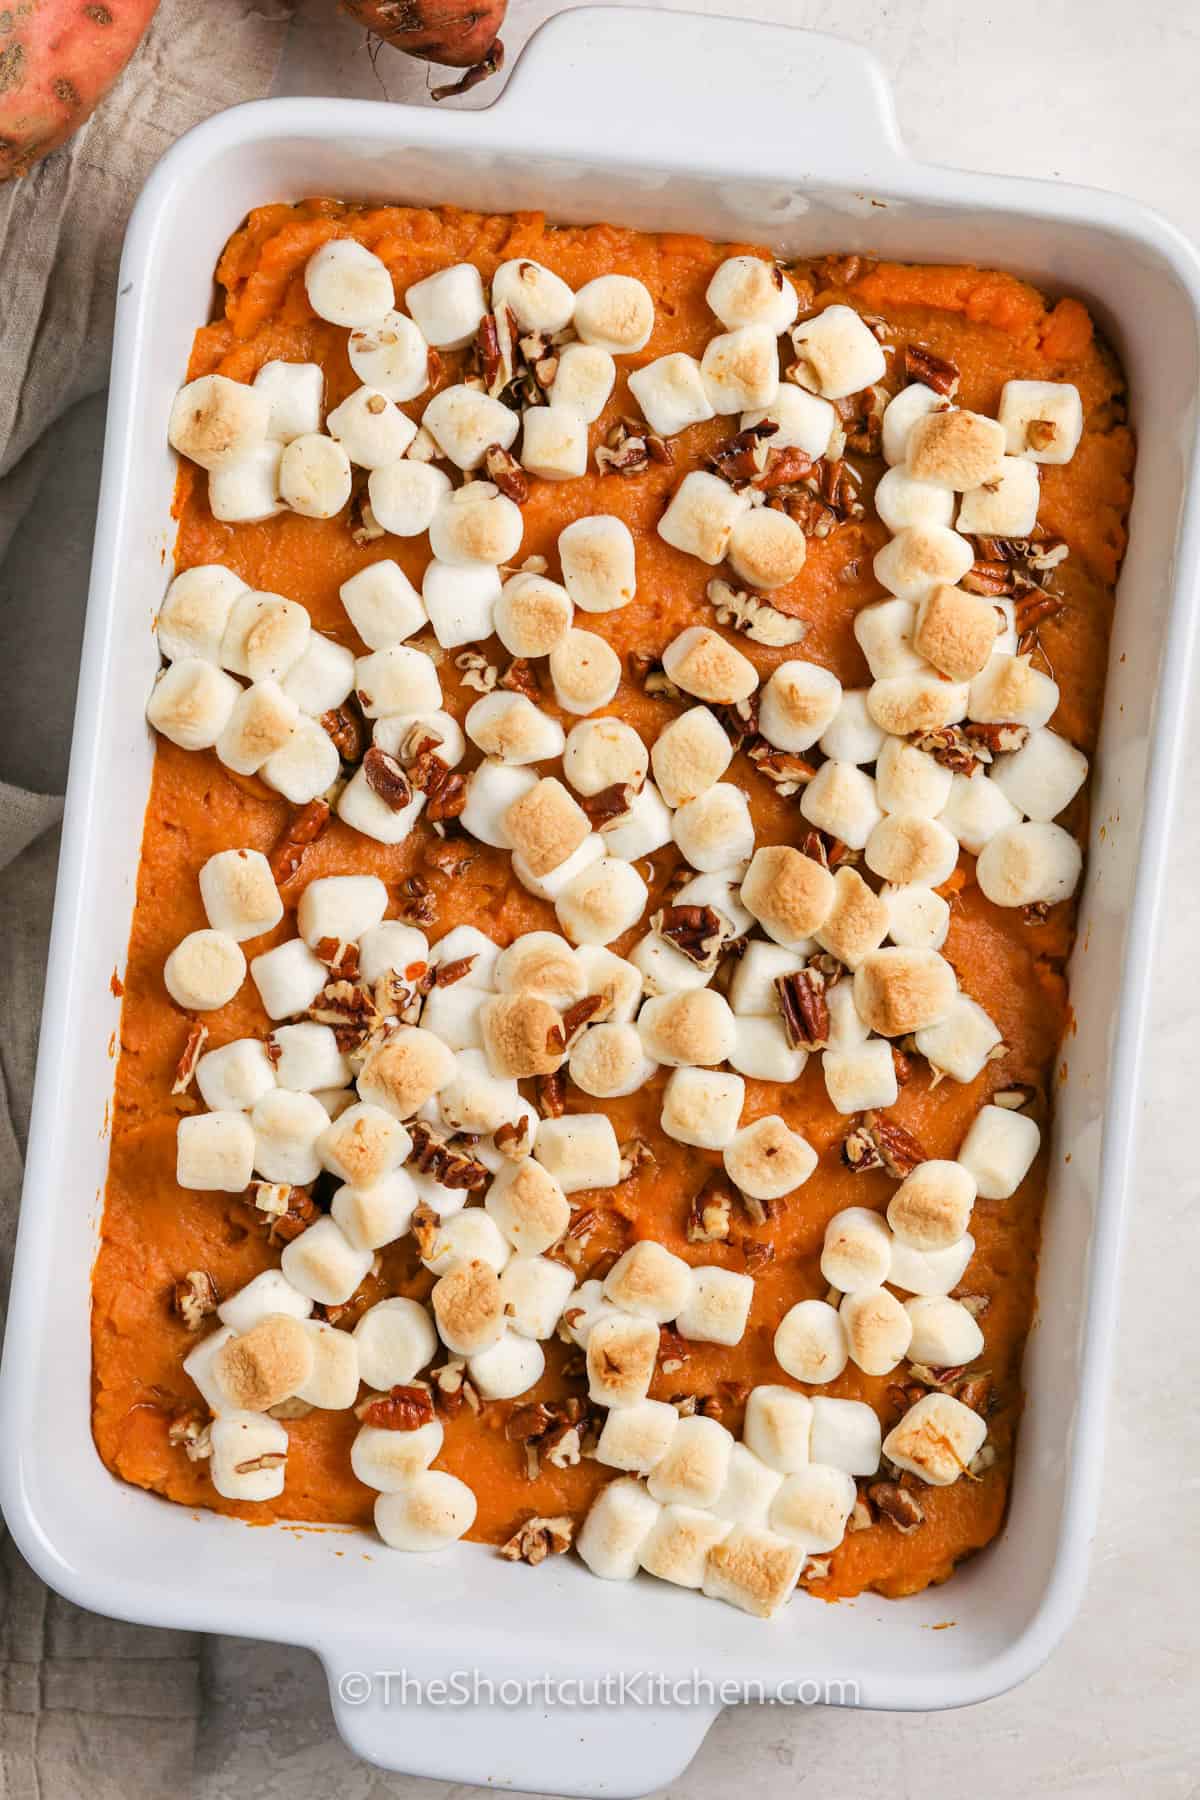 baked Canned Sweet Potato Casserole in the dish